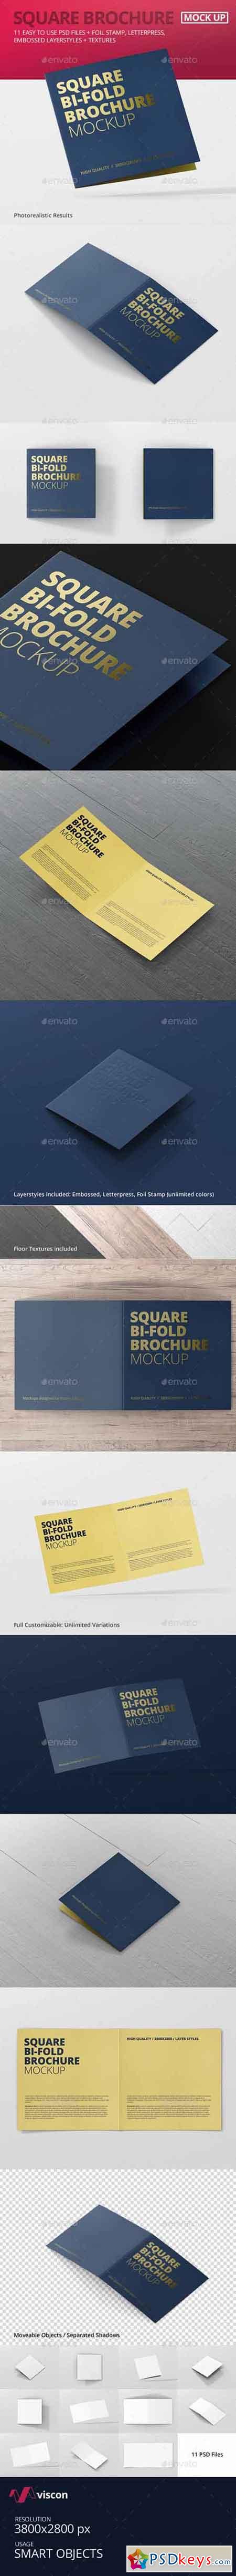 Download Square Page 20 Free Download Photoshop Vector Stock Image Via Torrent Zippyshare From Psdkeys Com PSD Mockup Templates